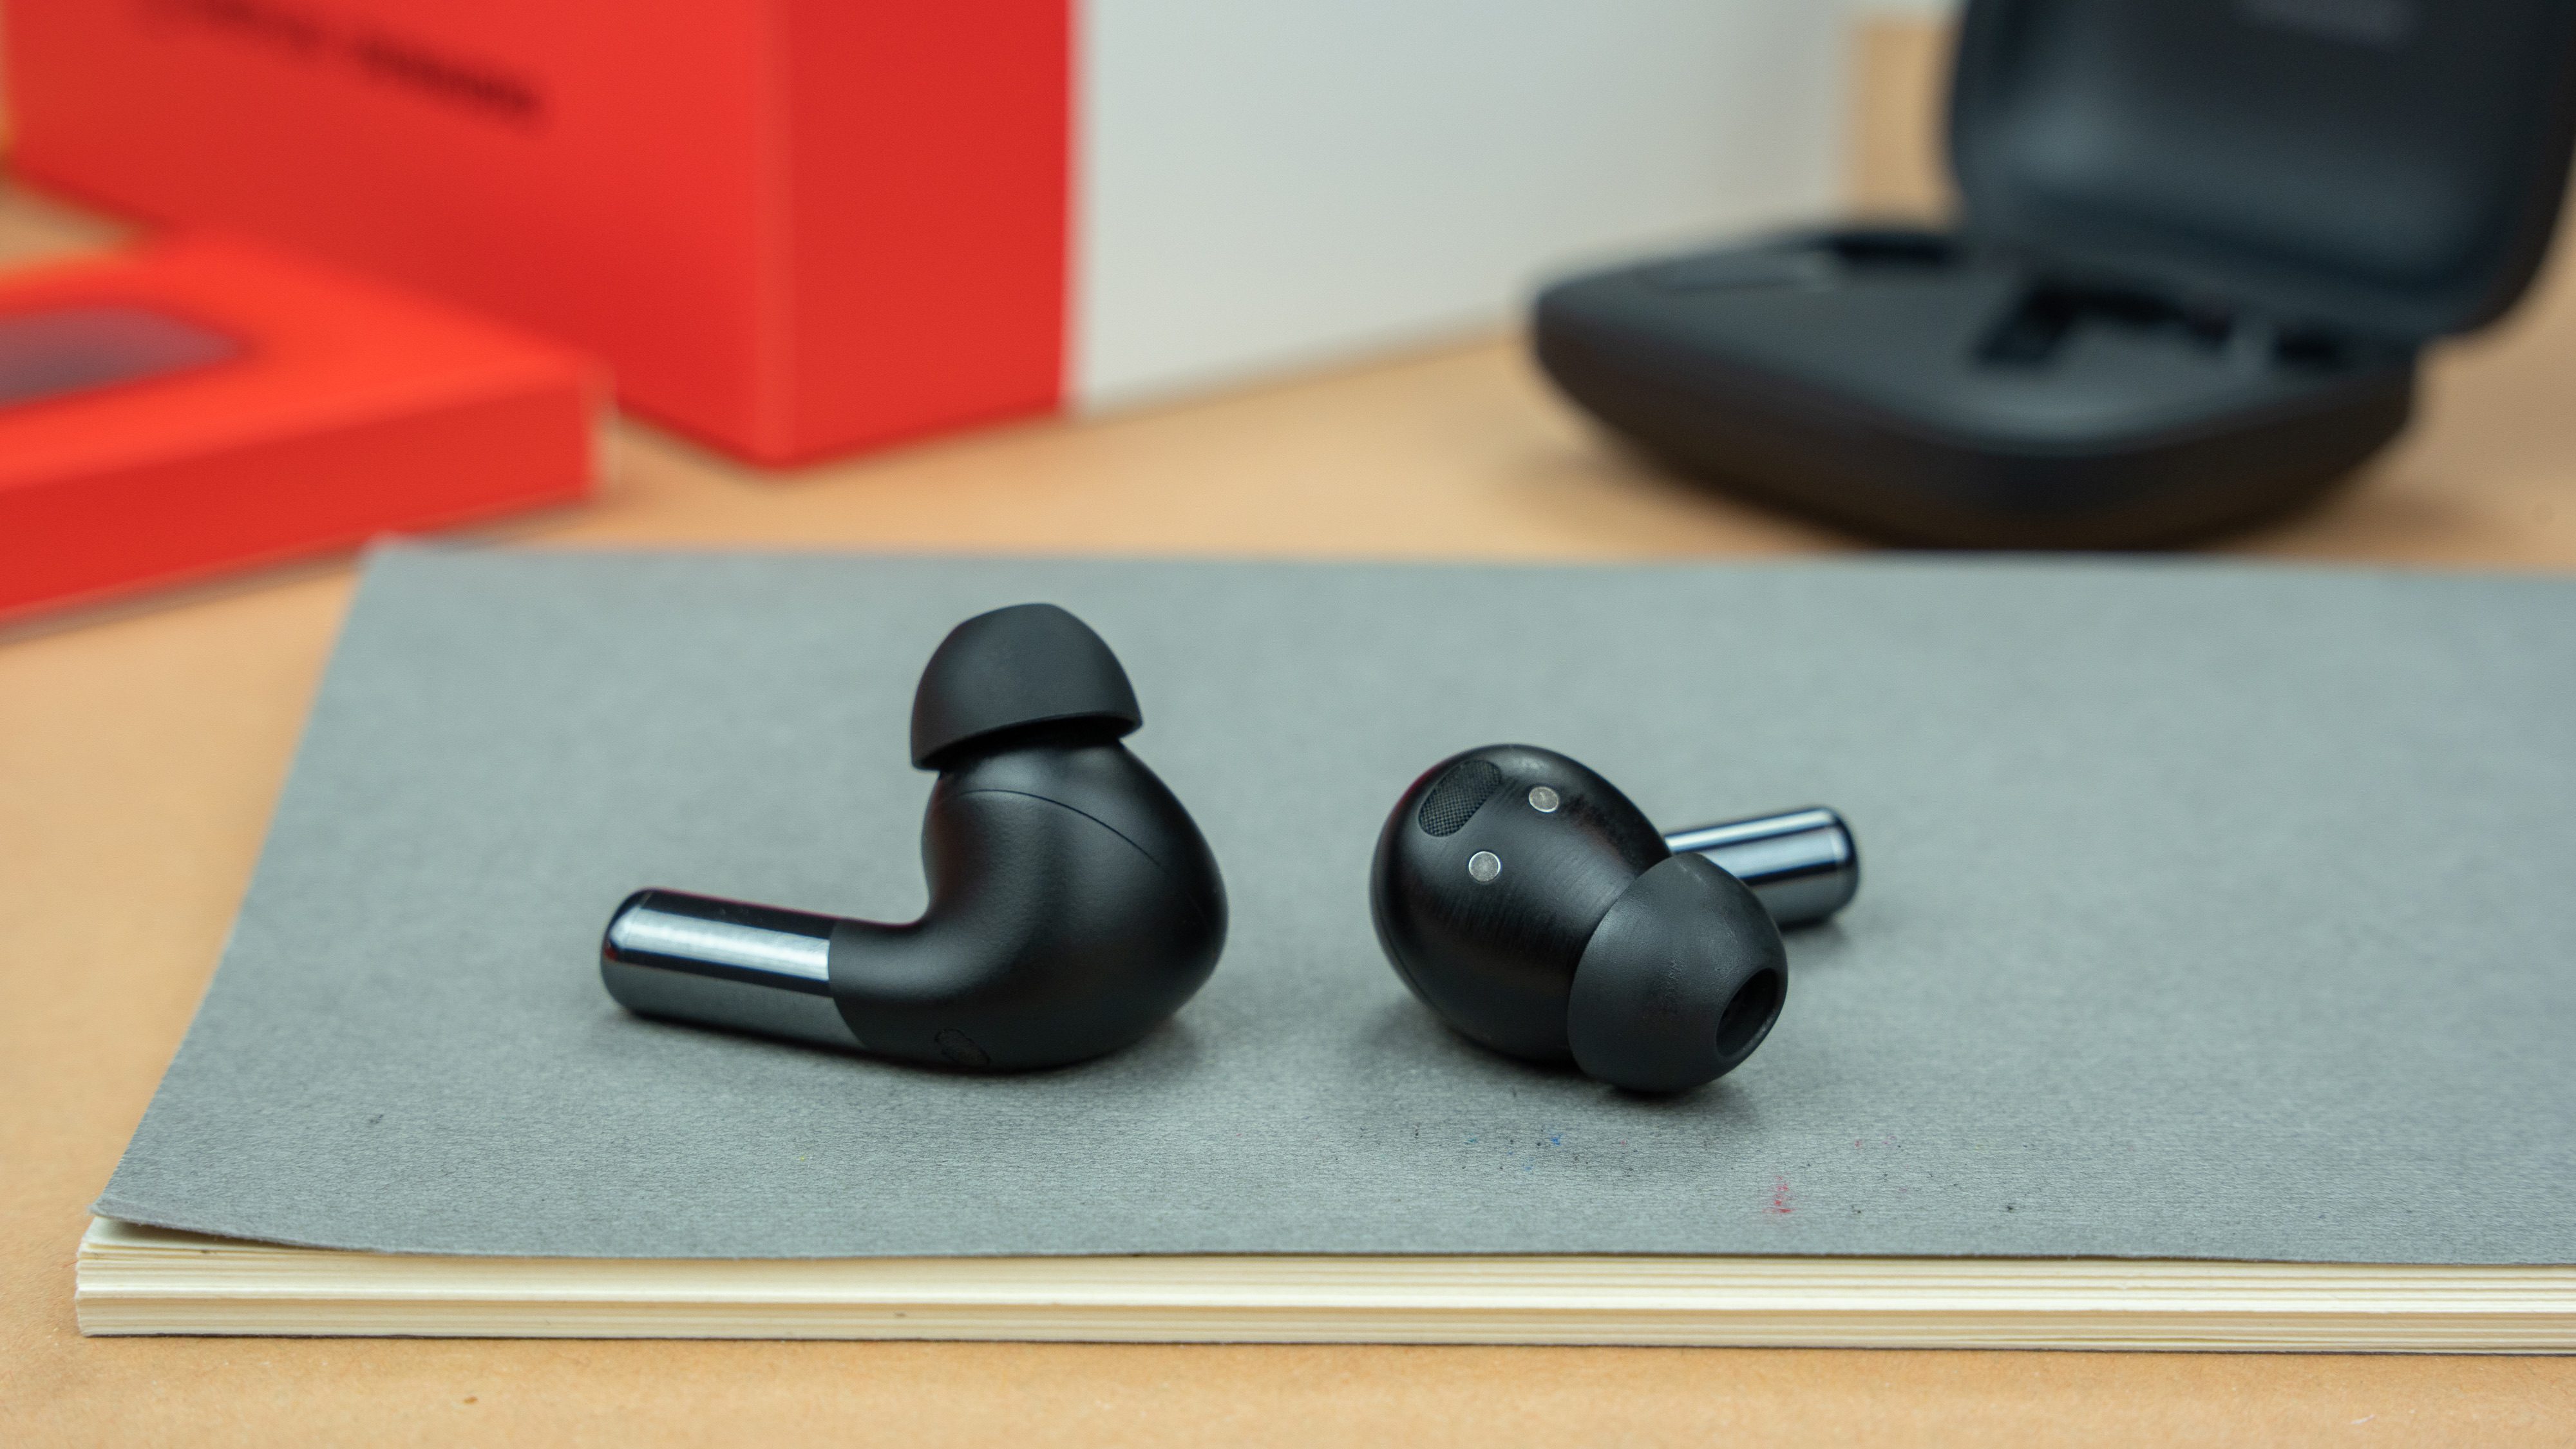 Oneplus Buds Pro 2 vs Samsung Galaxy Buds 2 pro - Ask me anything